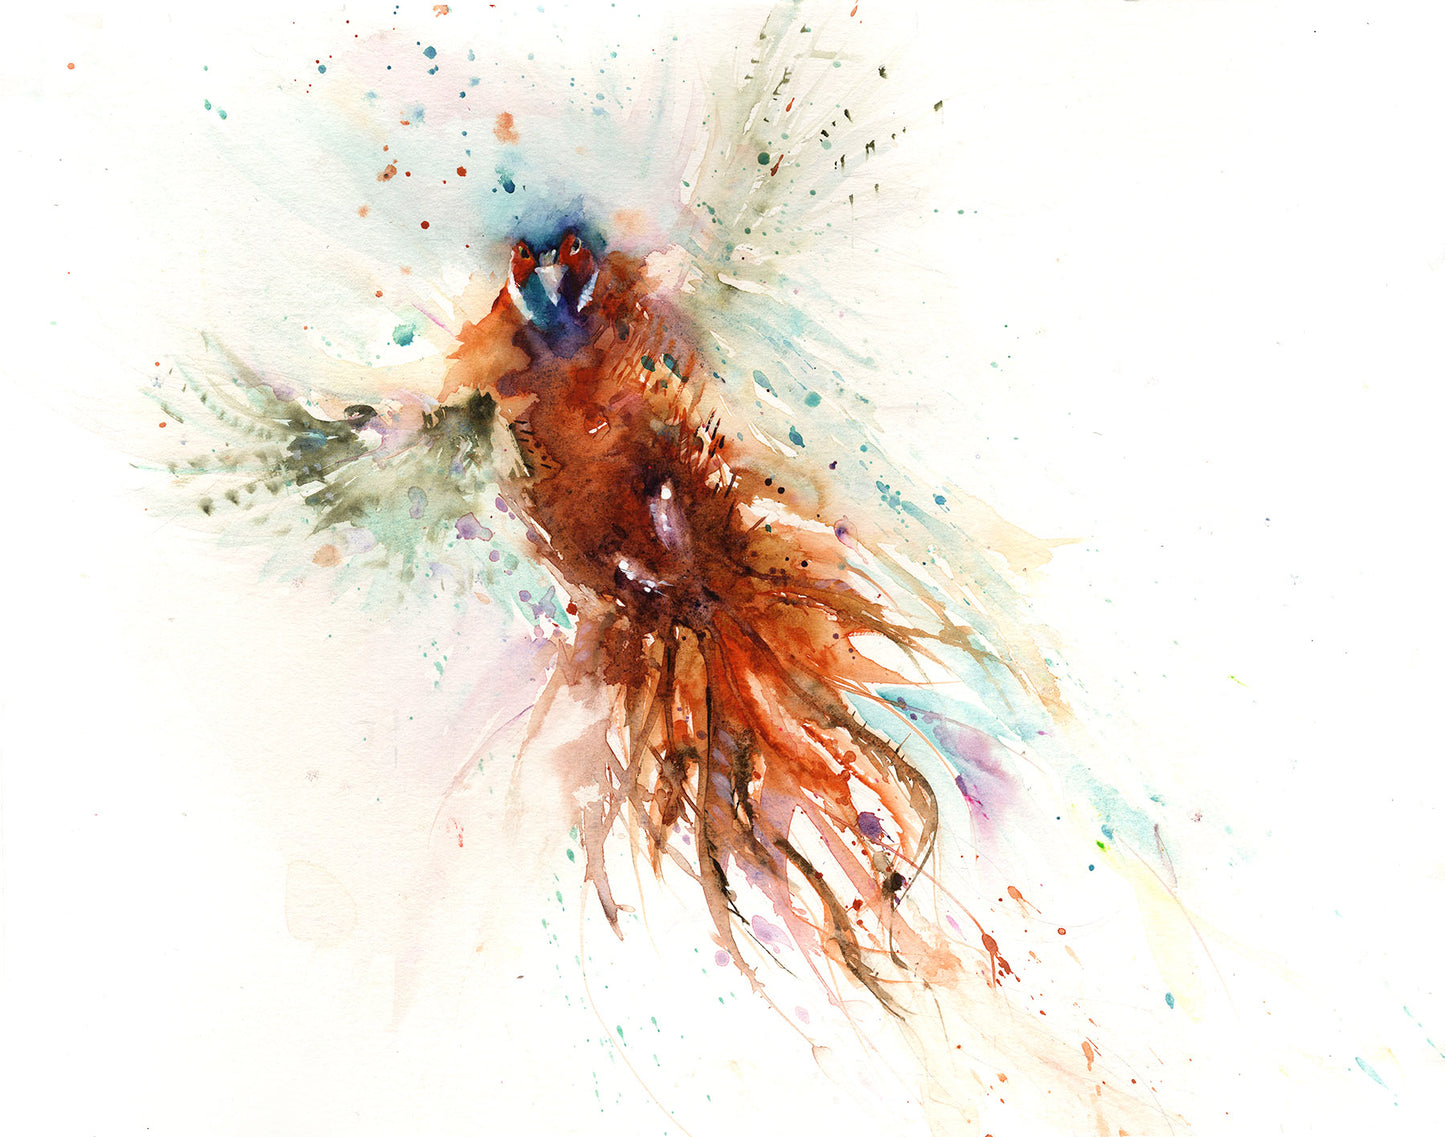 LIMITED EDITON print 'Flushed pheasant' from original watercolour painting - Jen Buckley Art limited edition animal art prints